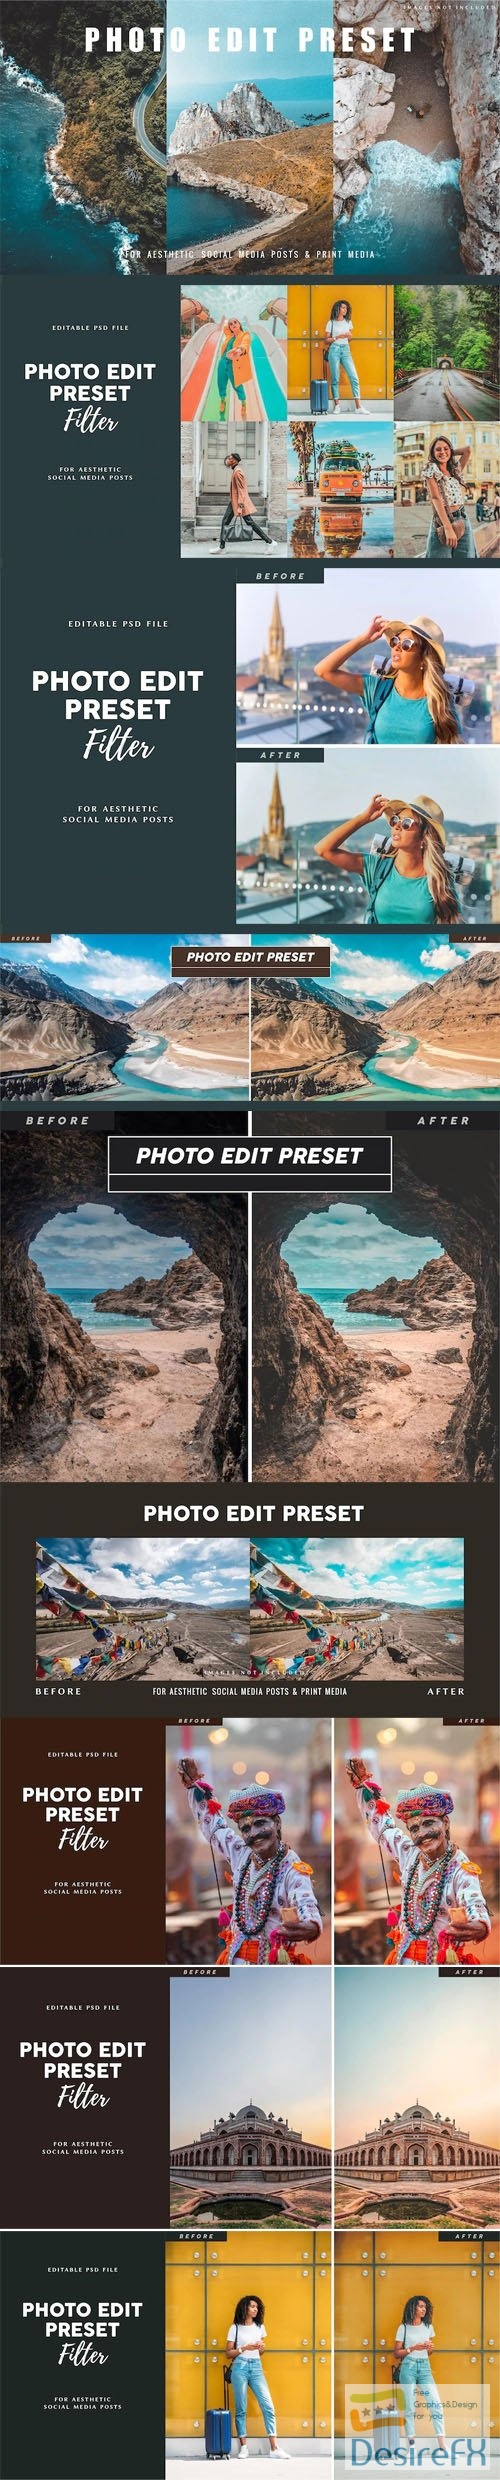 Photo Edit Preset Filters for Aesthetic Social Media Posts - 9 Photoshop Filters